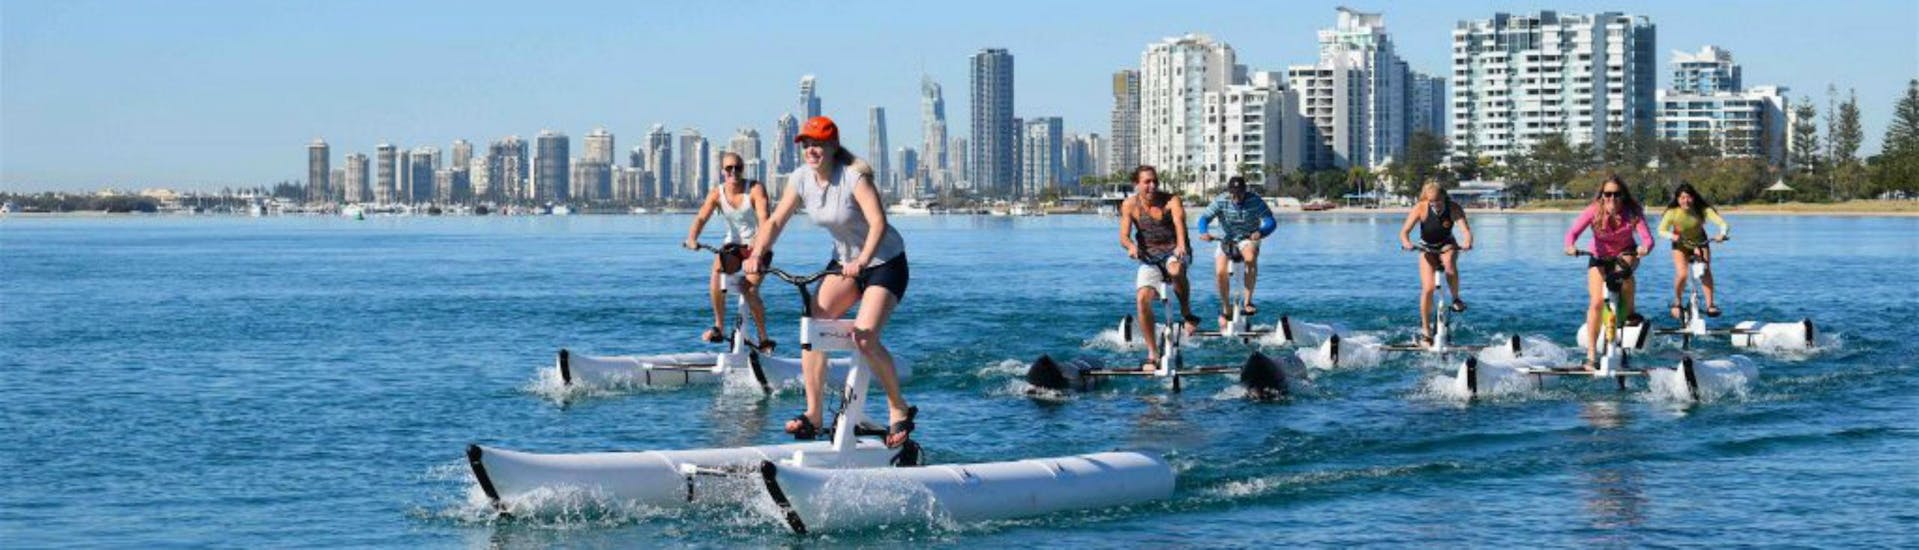 A group of people is pedalling across the broadwater during the Water Bike & Snorkeling in Gold Coast tour with Seaway Kayaking Tours.